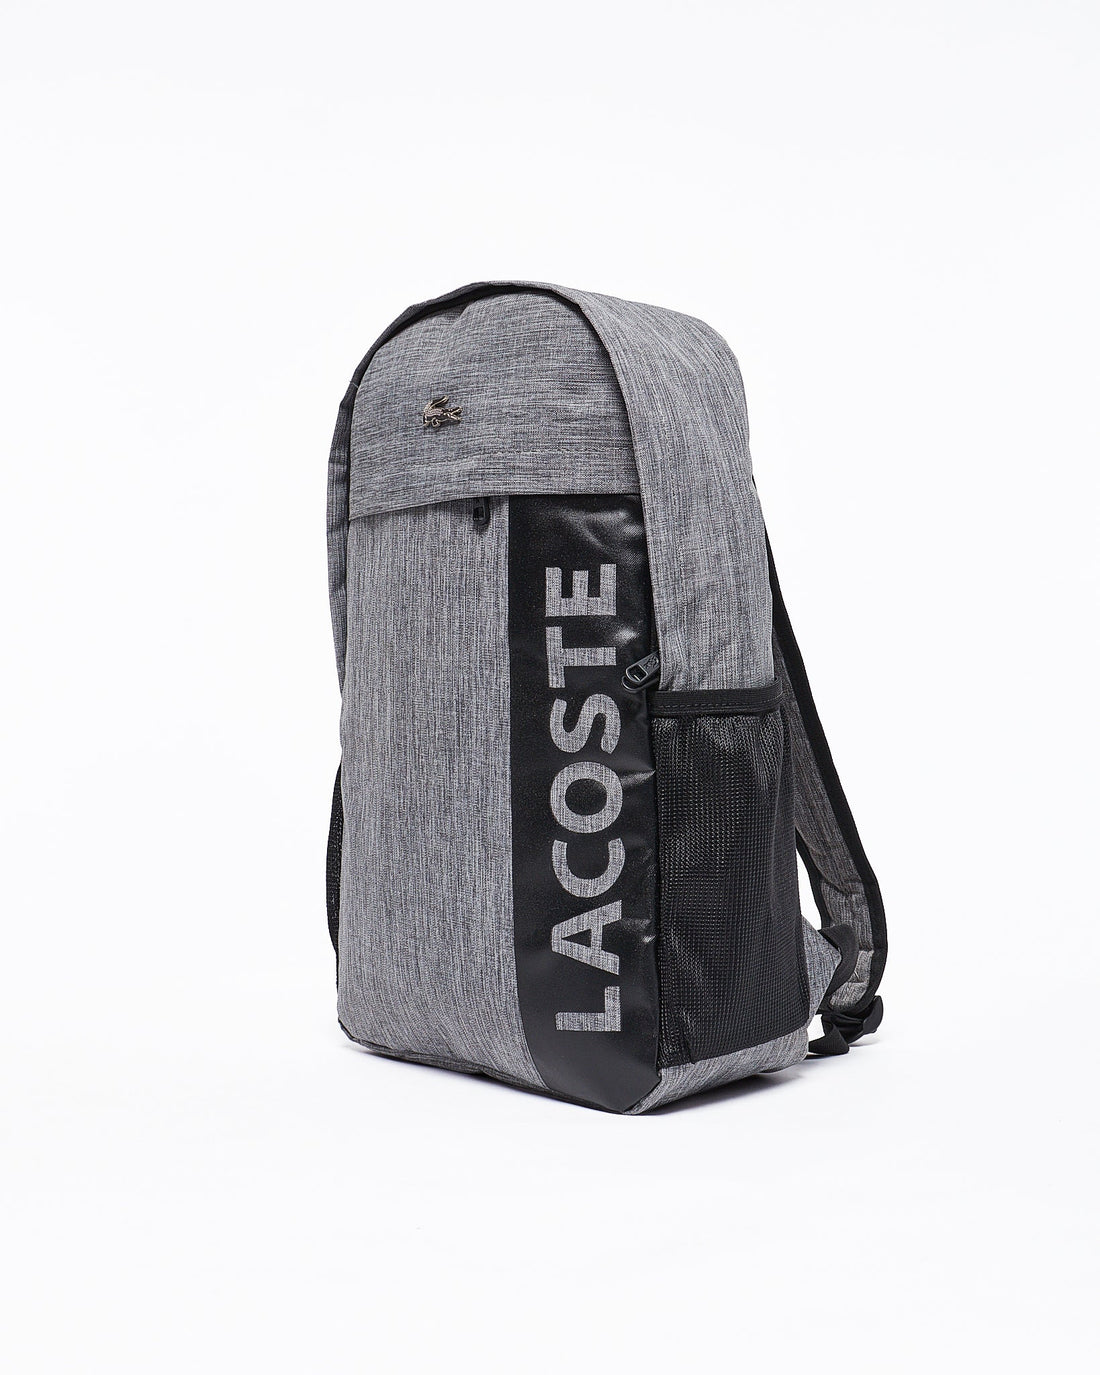 MOI OUTFIT-Logo Vertical Printed Backpack 22.90